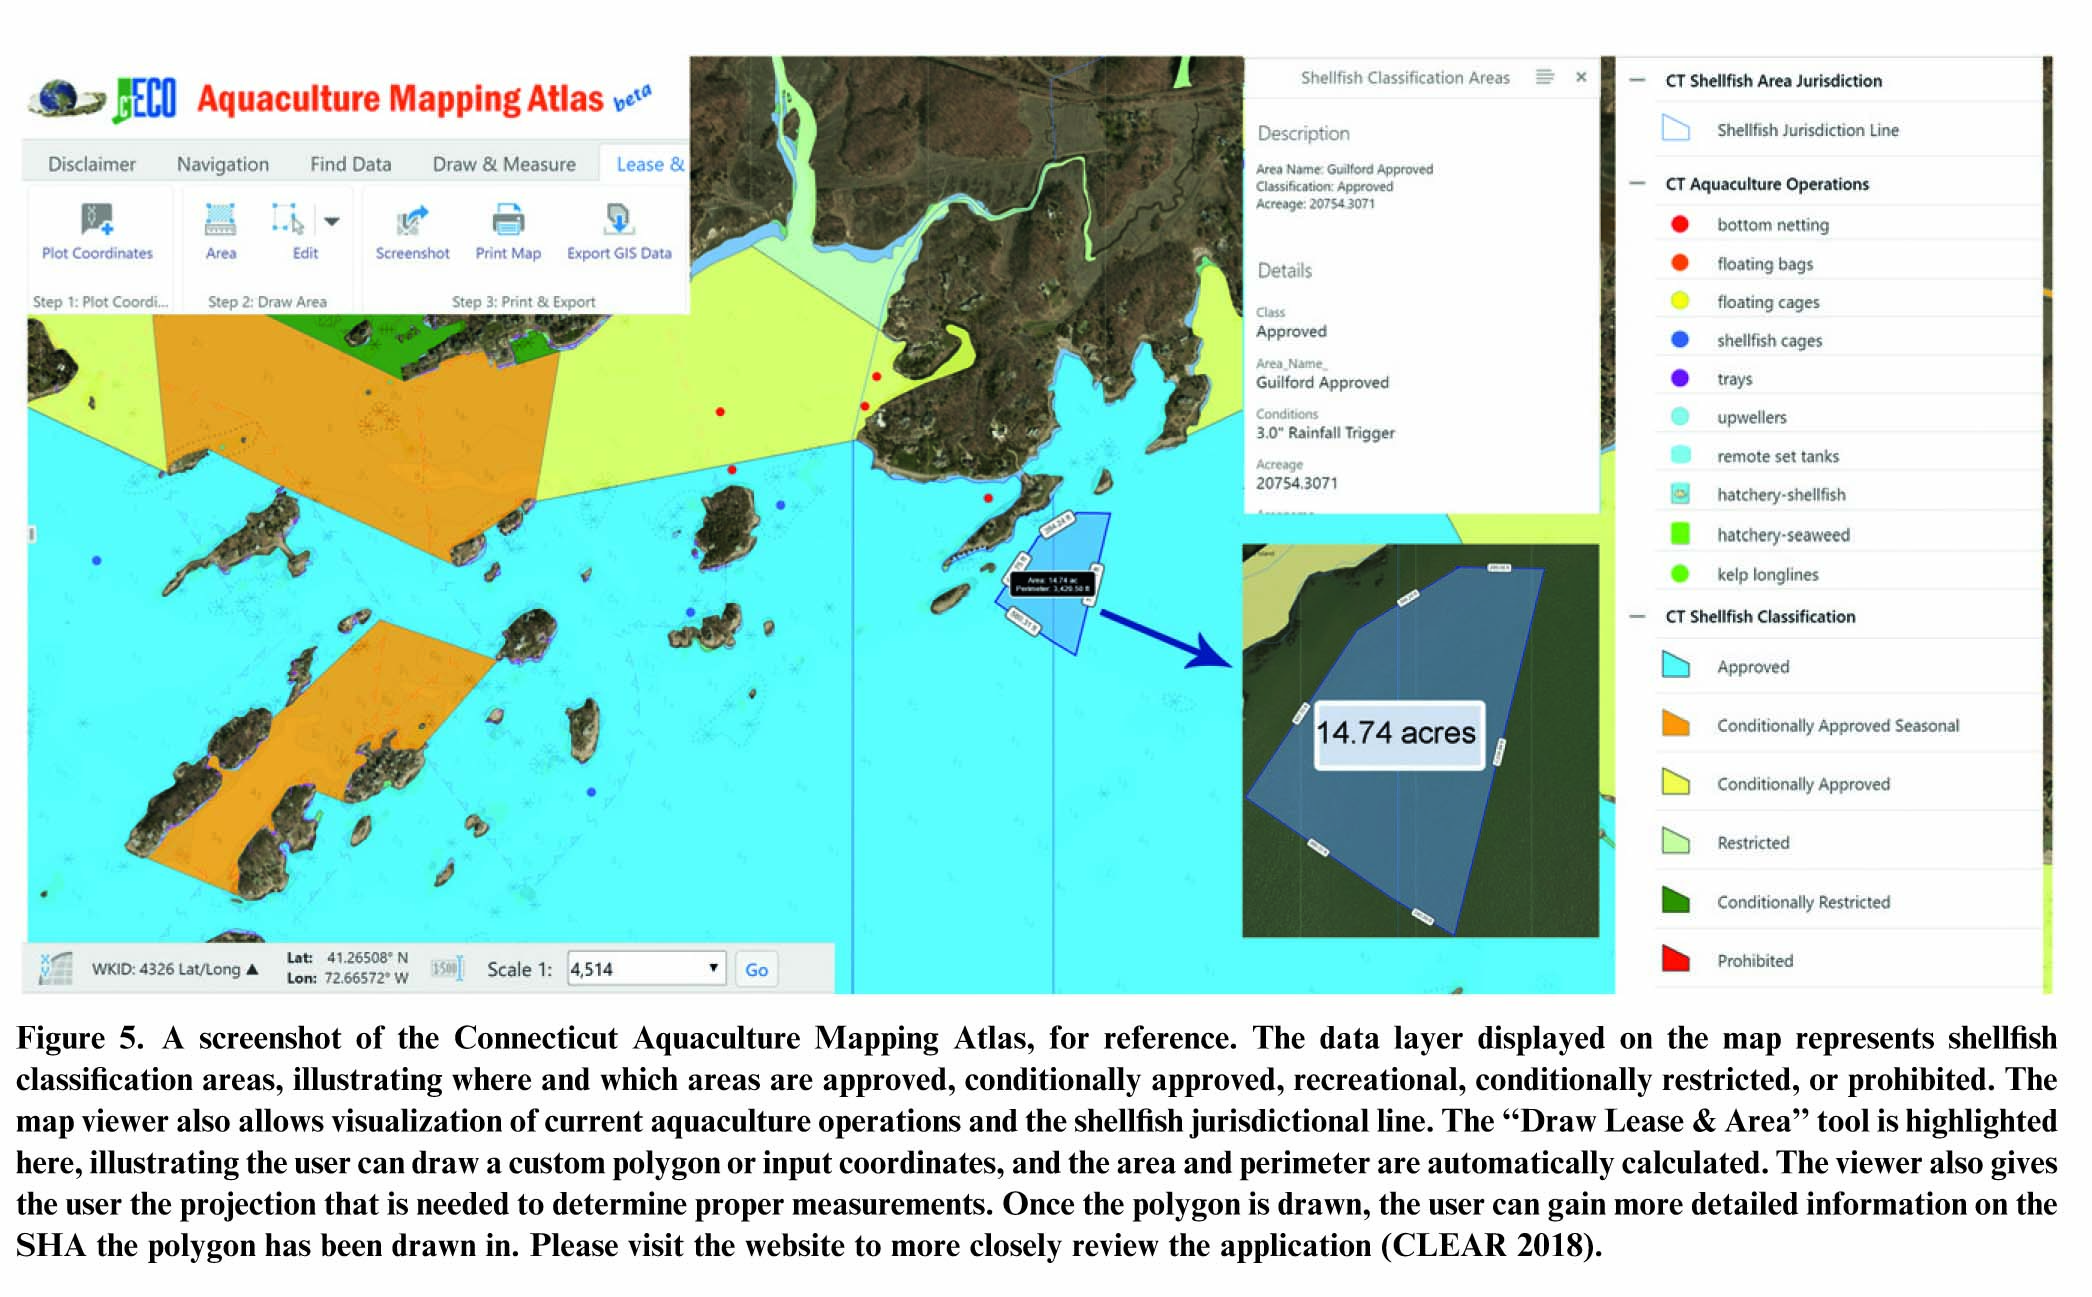 Journal article highlights the CT Aquaculture Mapping ...